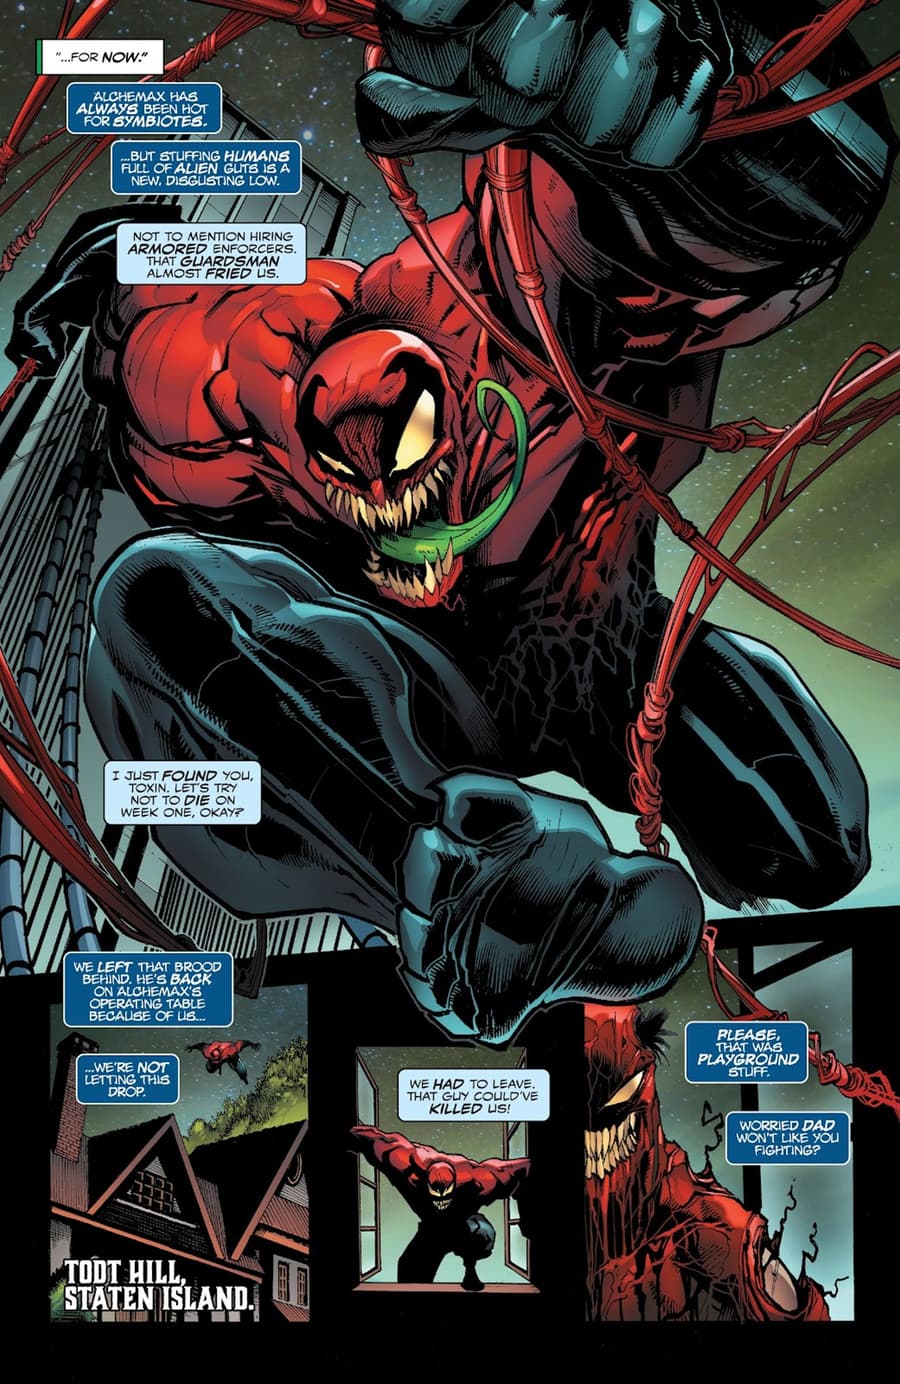 KING IN BLACK: PLANET OF THE SYMBIOTES (2021) #3 page by Steve Orlando and Gerardo Sandoval